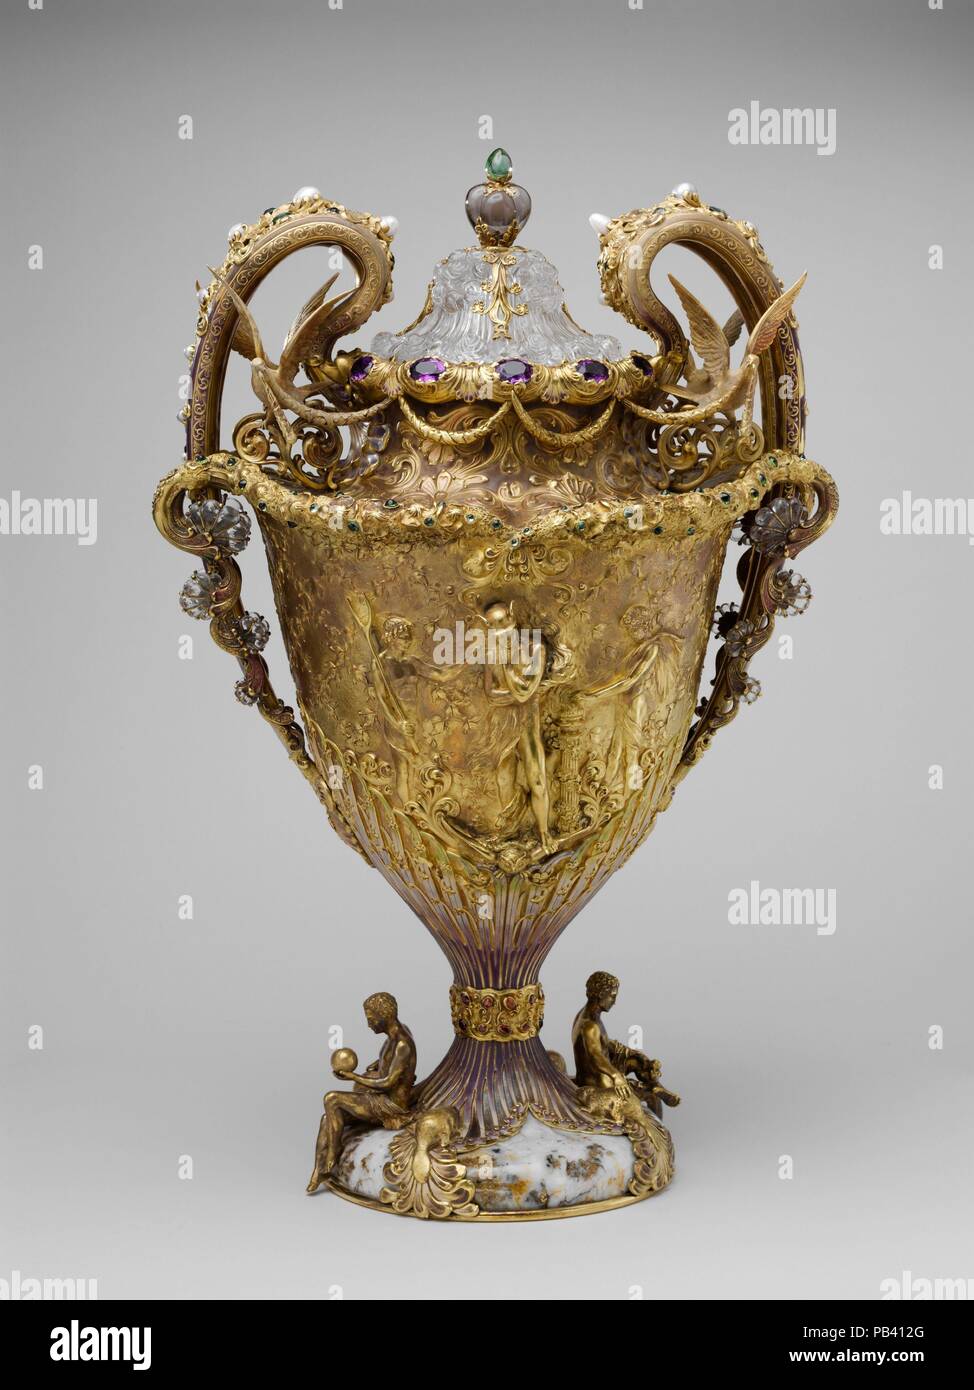 The Adams Vase. Culture: American. Designer: Designed by Paulding Farnham (1859-1927). Dimensions: Overall: 19 7/16 x 13 x 9 1/4 in. (49.4 x 33 x 23.5 cm); 352 oz. 18 dwt. (10977 g)  Body: H. 18 7/8 in. (47.9 cm)  Cover: 4 1/4 x 4 13/16 in. (10.8 x 12.2 cm); 19 oz. 6 dwt. (600.1 g). Manufacturer: Manufactured by Tiffany & Co. (1837-present). Date: 1893-95.  Commissioned in honor of Edward Dean Adams, chairman of the board of the American Cotton Oil Company, this bejeweled and enameled gold vase was designed to resemble the cotton plant. The overall form and coloration emulate those of the bell Stock Photo